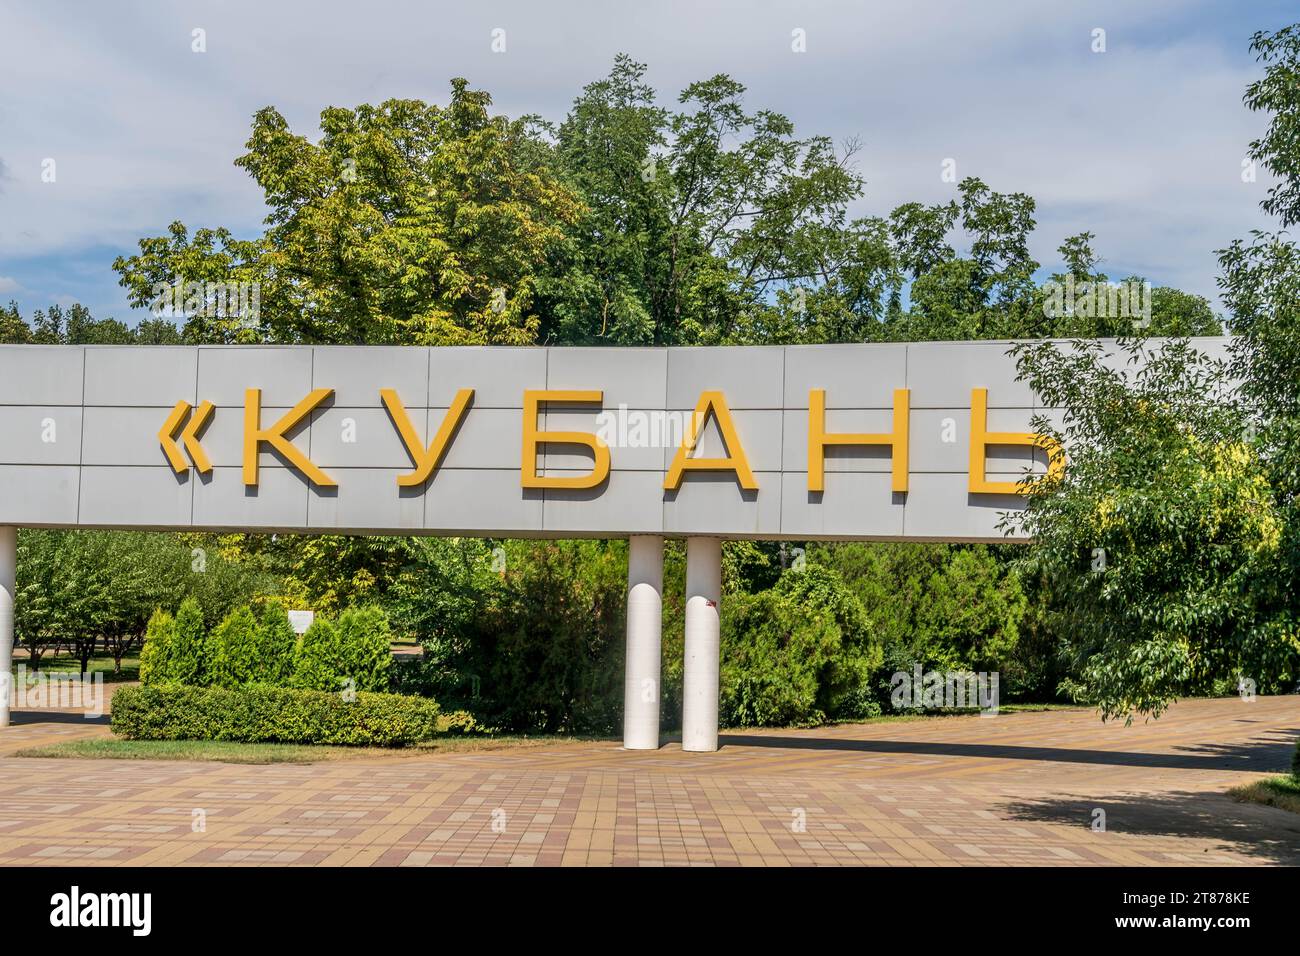 The large title 'Kuban', name of the region in the Southern Russia (also known as Krasnodar krai), written in Russian language, in Krasnodar, Russia Stock Photo